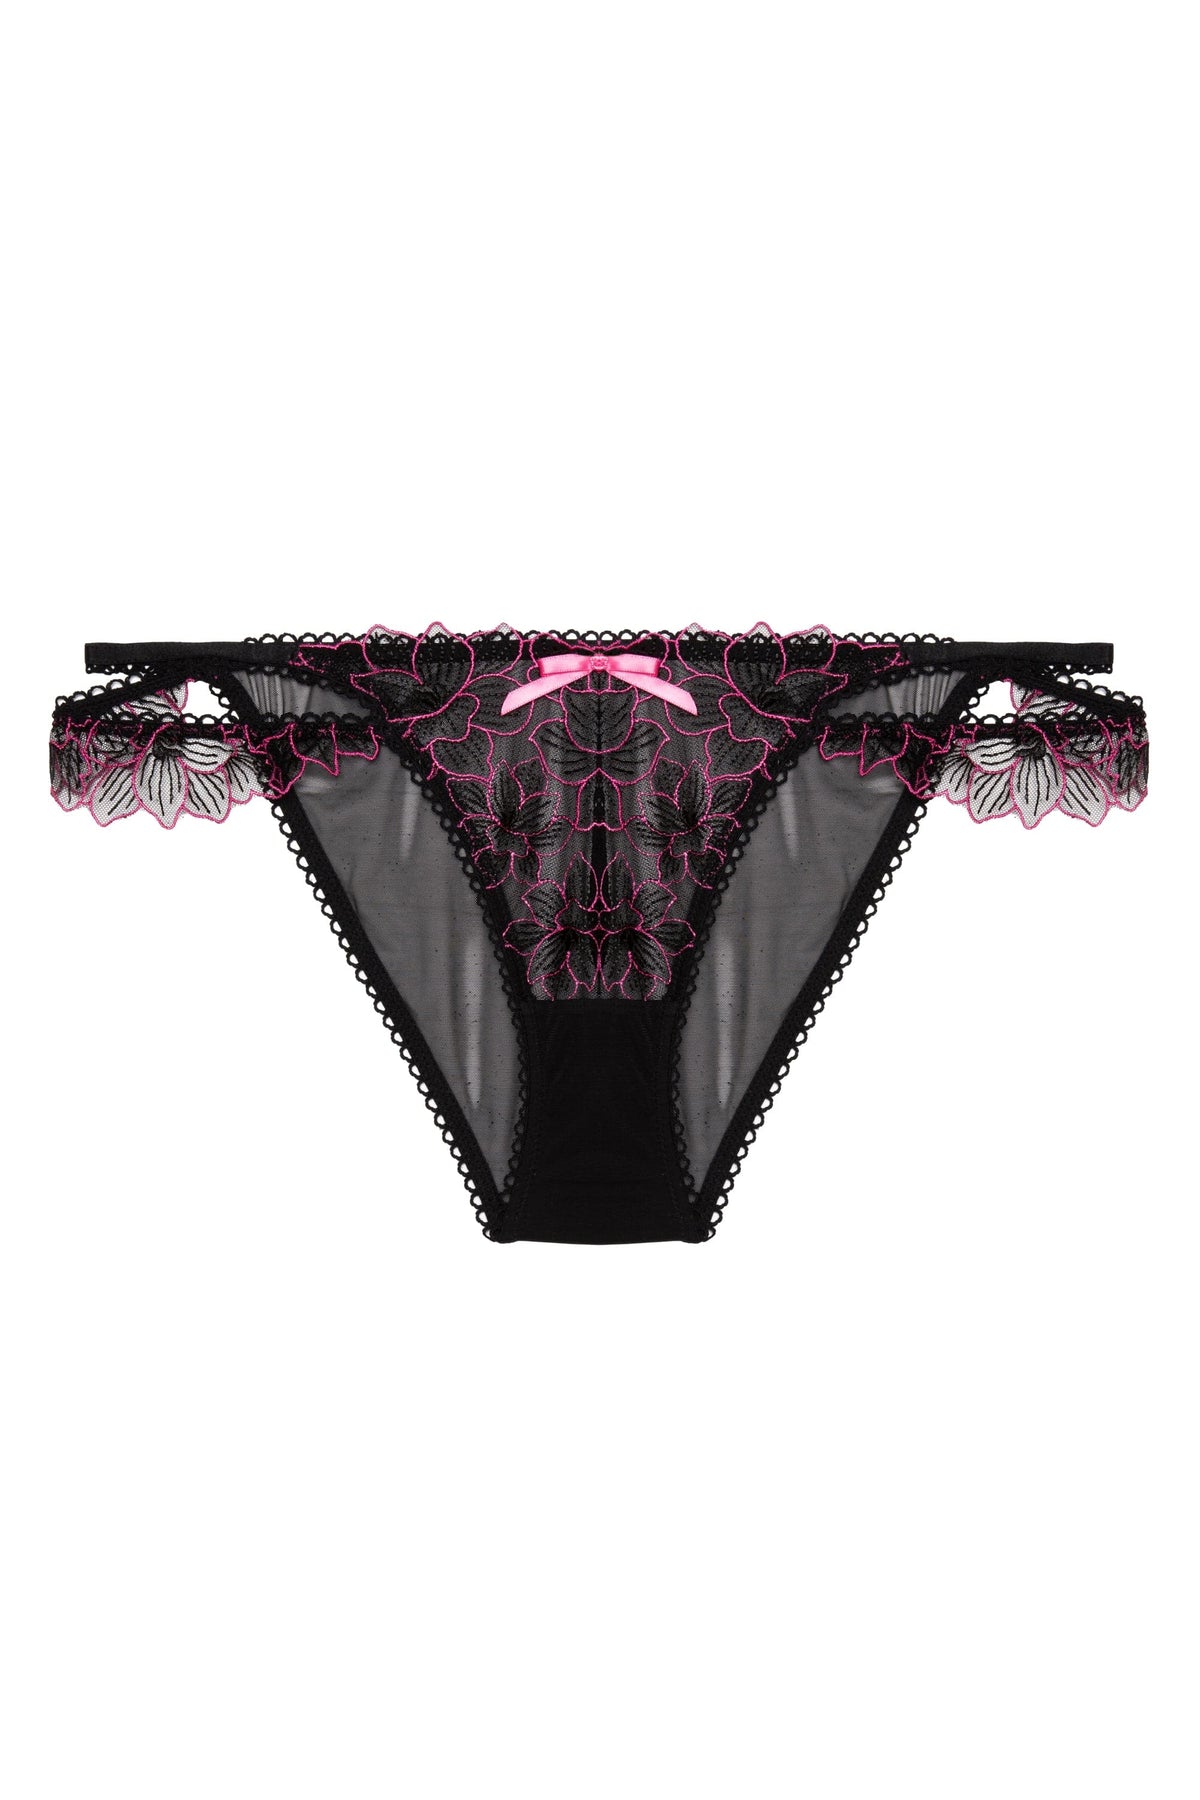 Black mesh brief with hot pink floral embroidery detail and a pink bow in the centre.